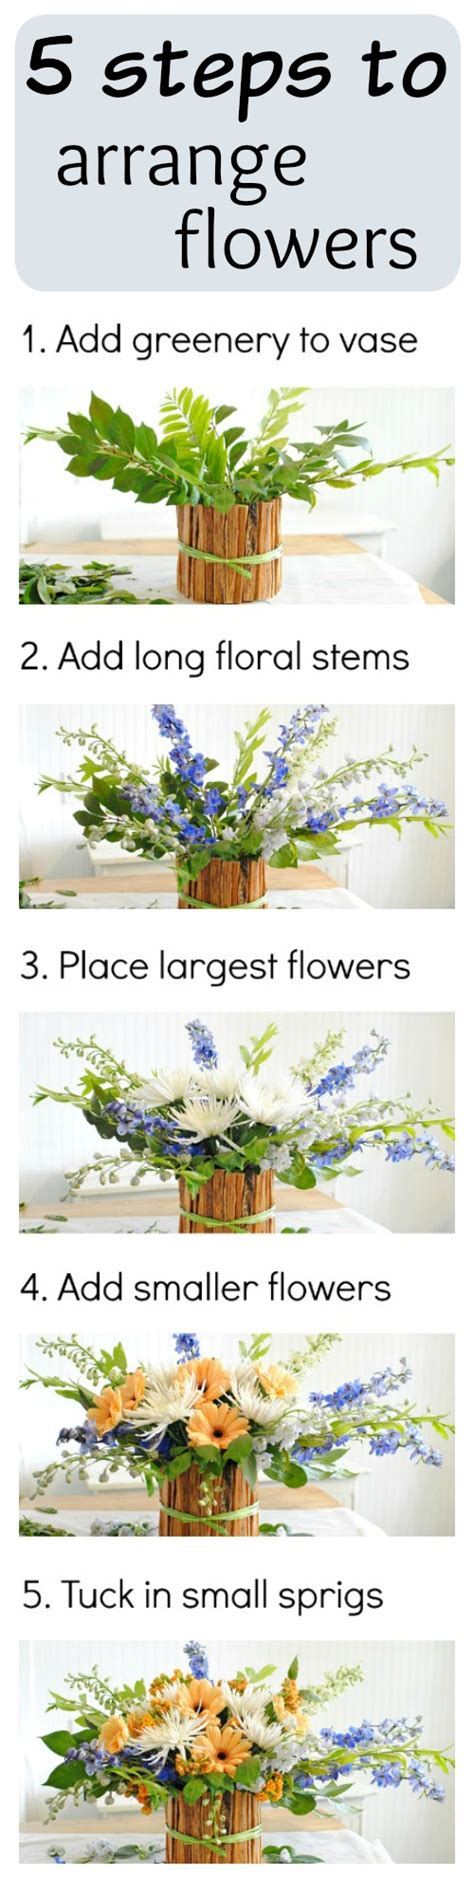 How To Arrange Flowers With Matthew Robbins Town And Country Living